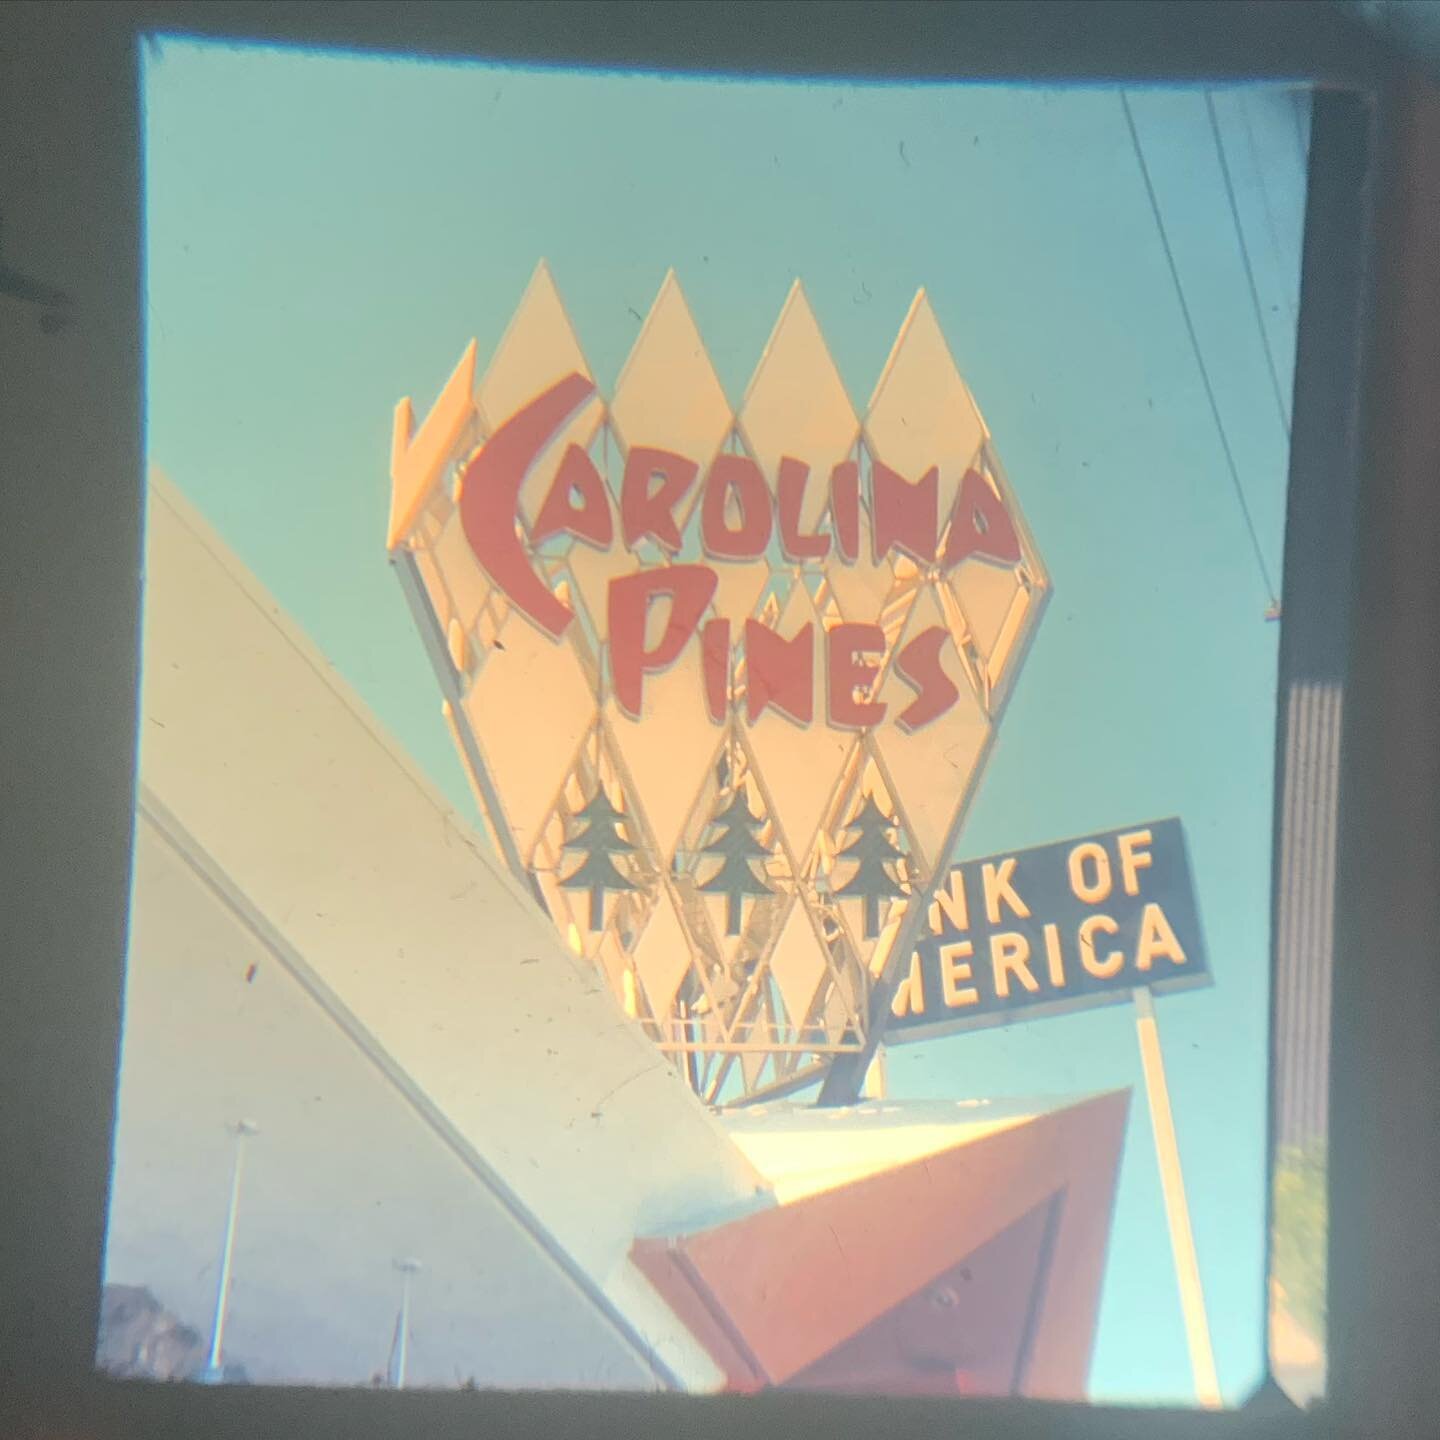 Looking through a Jack Laxer slide of Carolina Pines Jr. 3 on Ventura Blvd. see the rendering in GOOGIE MODERN! LINK IN BIO. 208 pages of Googie goodness.
#armetdavis #armetanddavis #midcenturymodernarchitecture #mcm #googiemodern
#midcenturymodern #